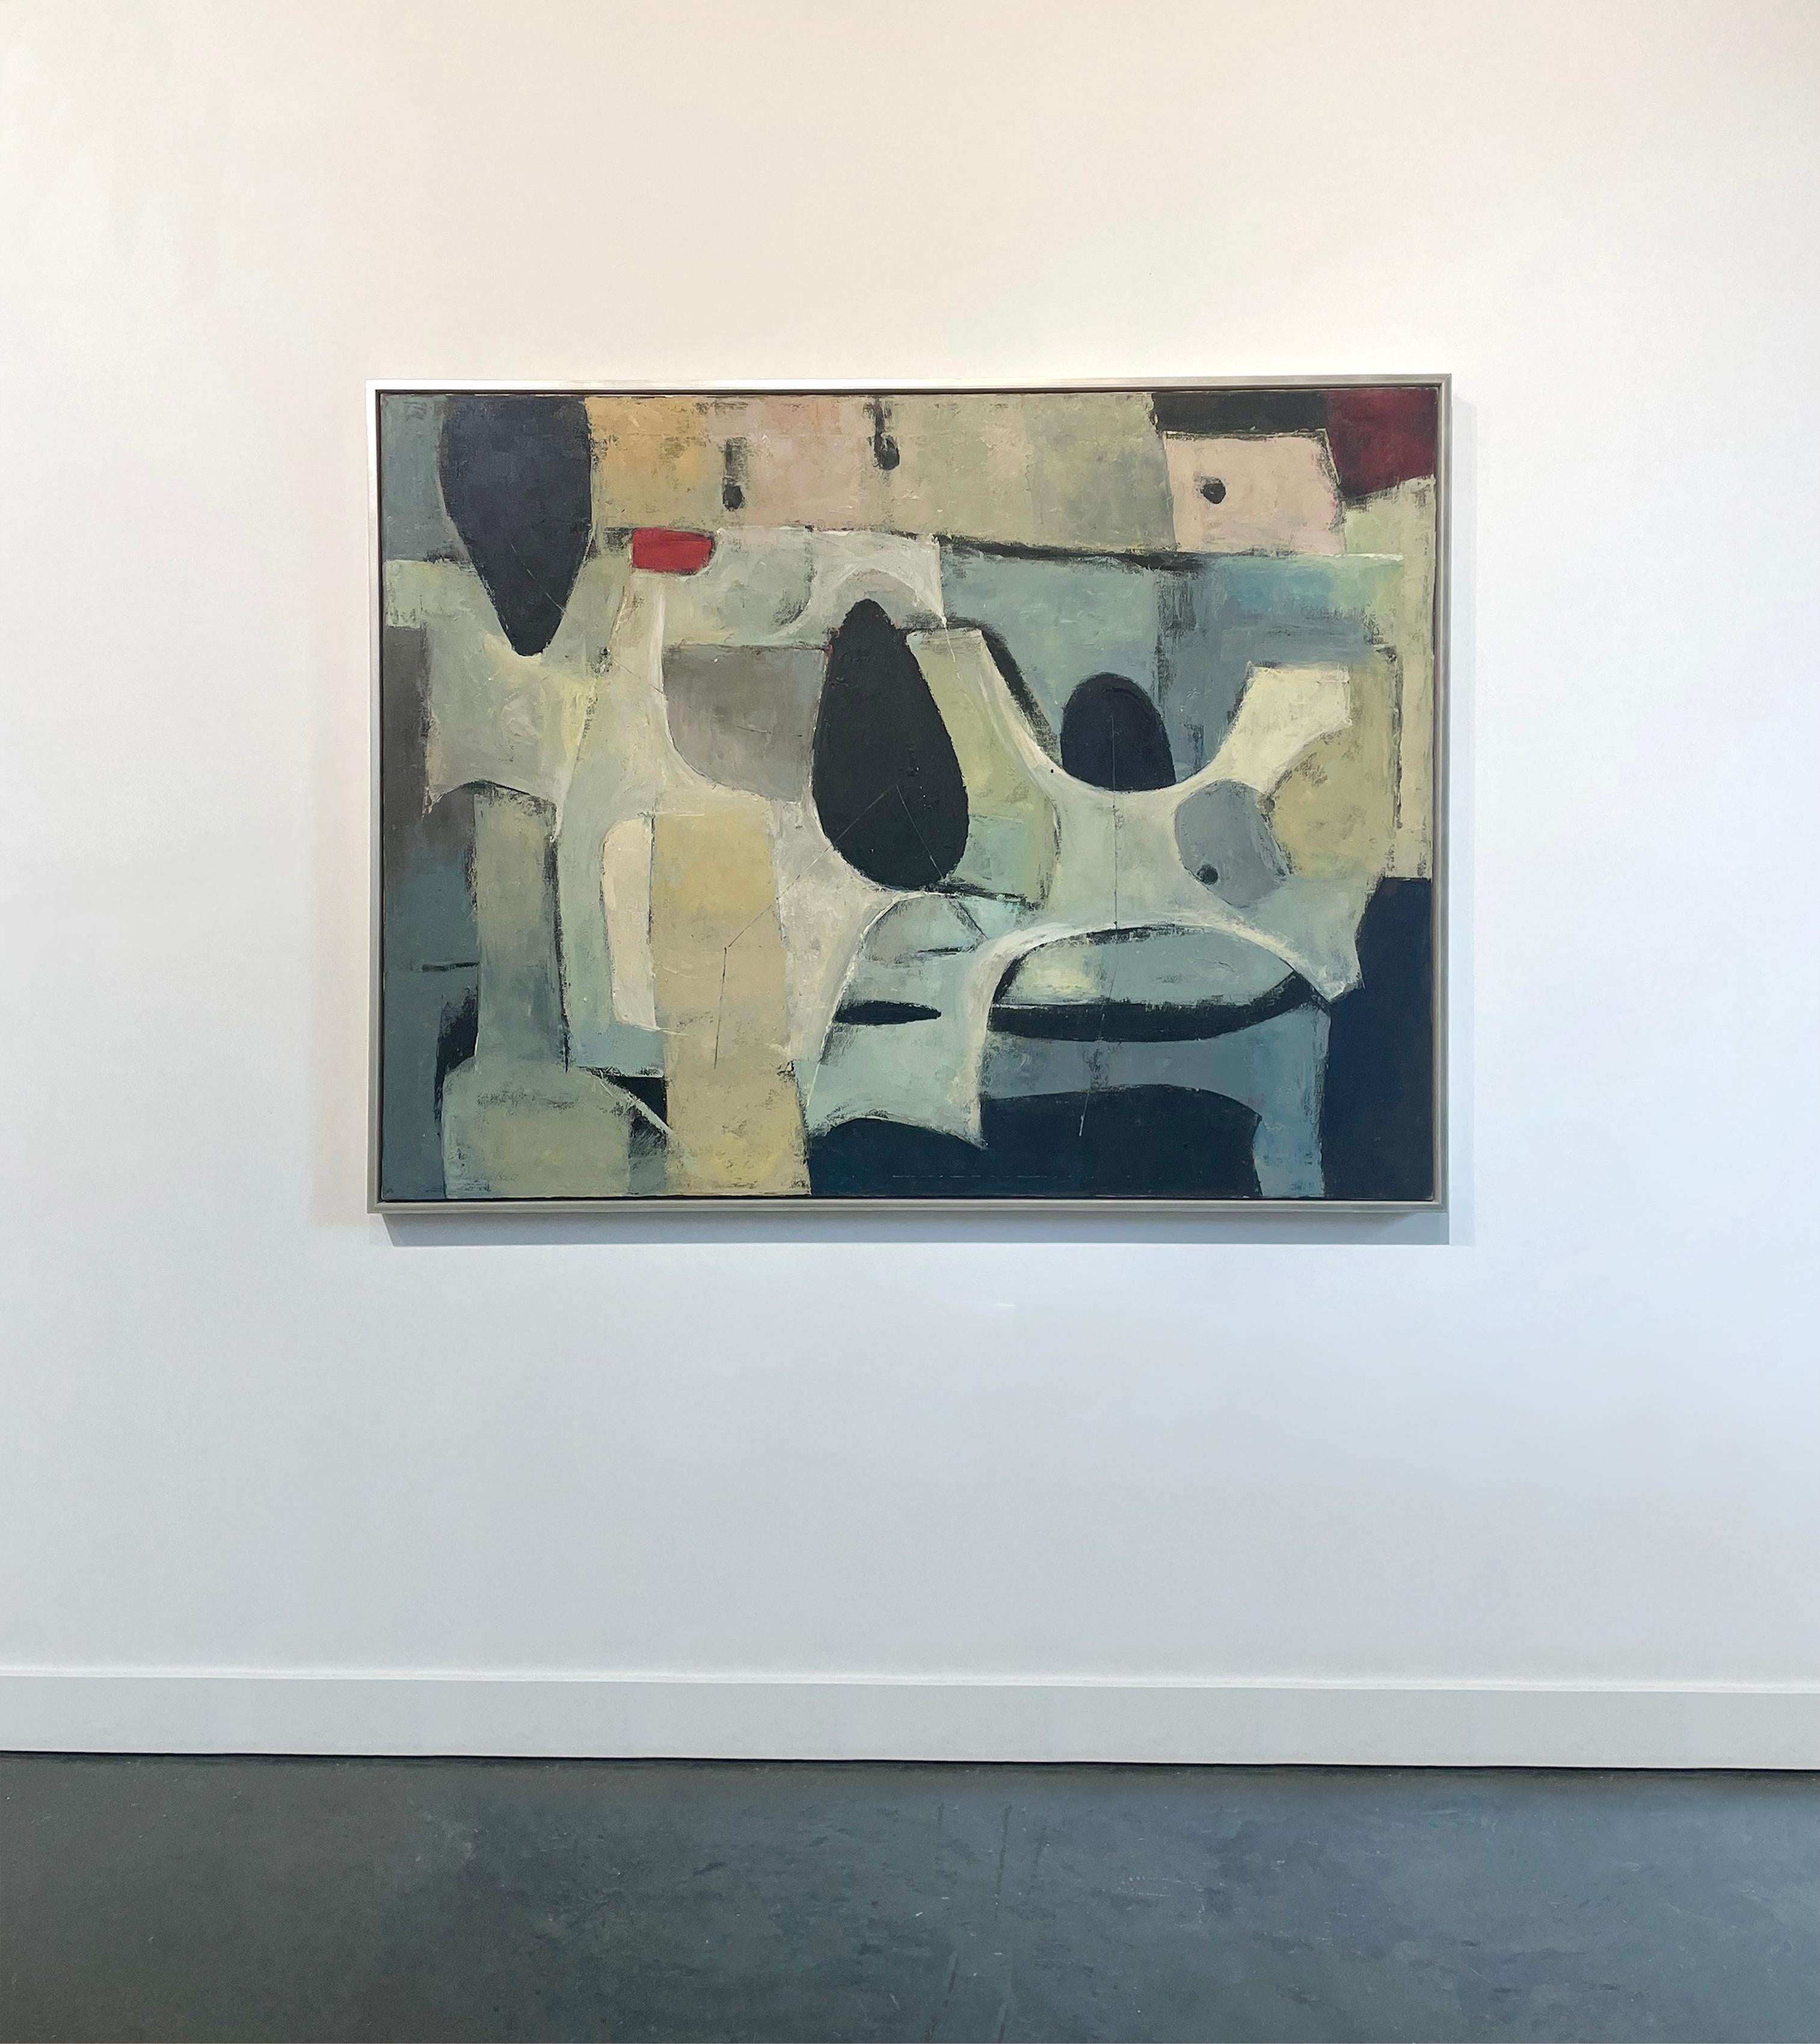 This Modern Abstract Expressionist painting Stanley Bate features abstracted shapes which are applied in thick, textured layer of paint over one another. the organic shapes are applied in varying colors including white, blue, muted green, and black.